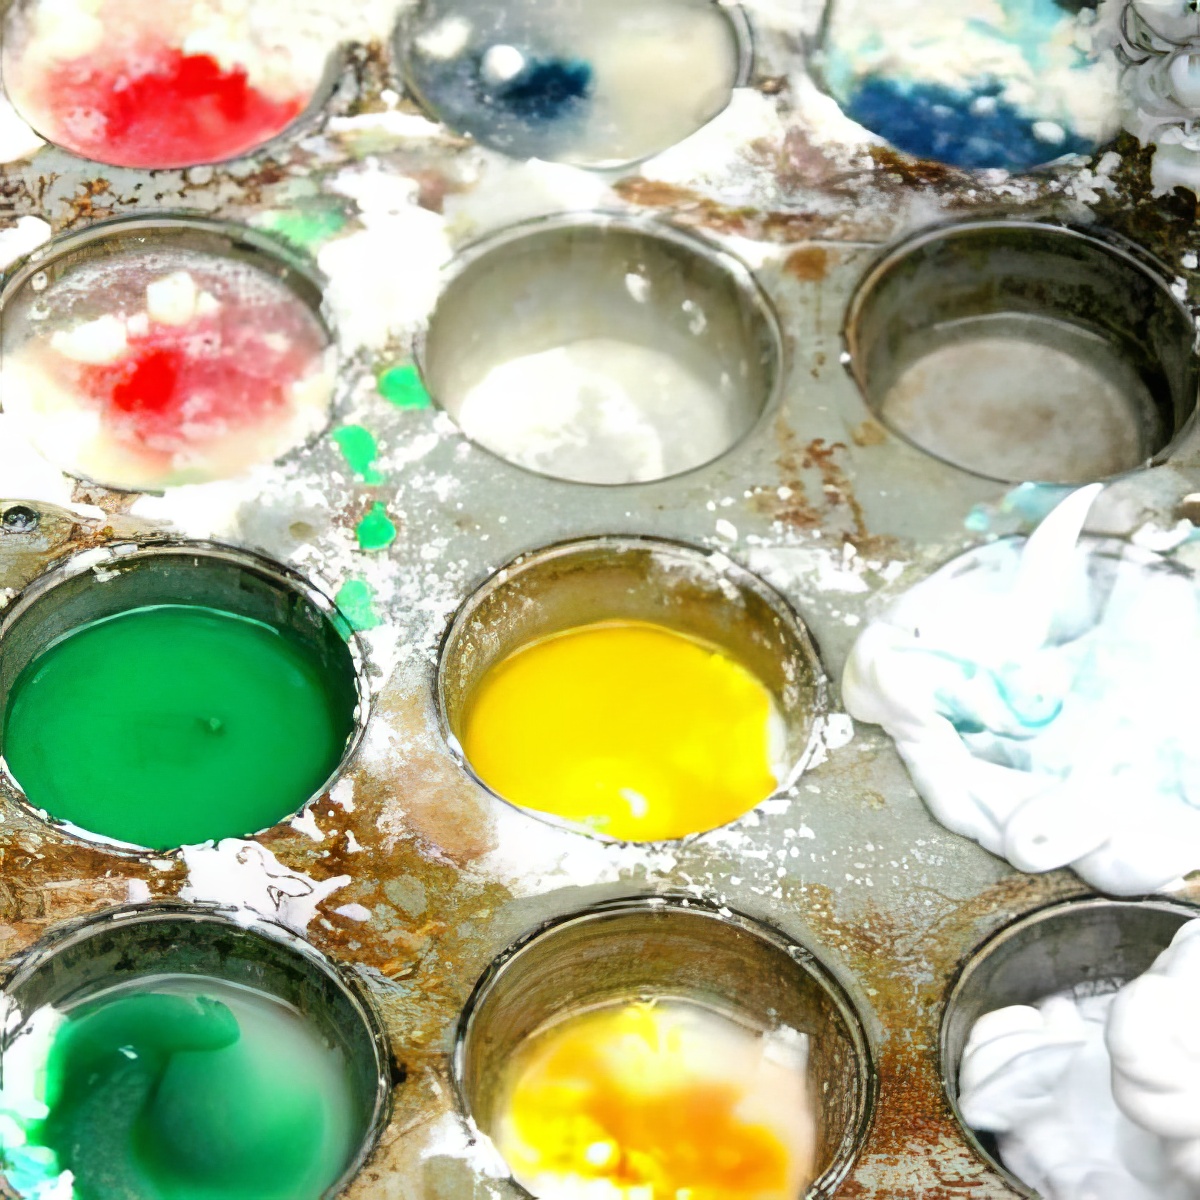 homemade paint, fun art activities for 2-year-olds, toddler fun arts and crafts